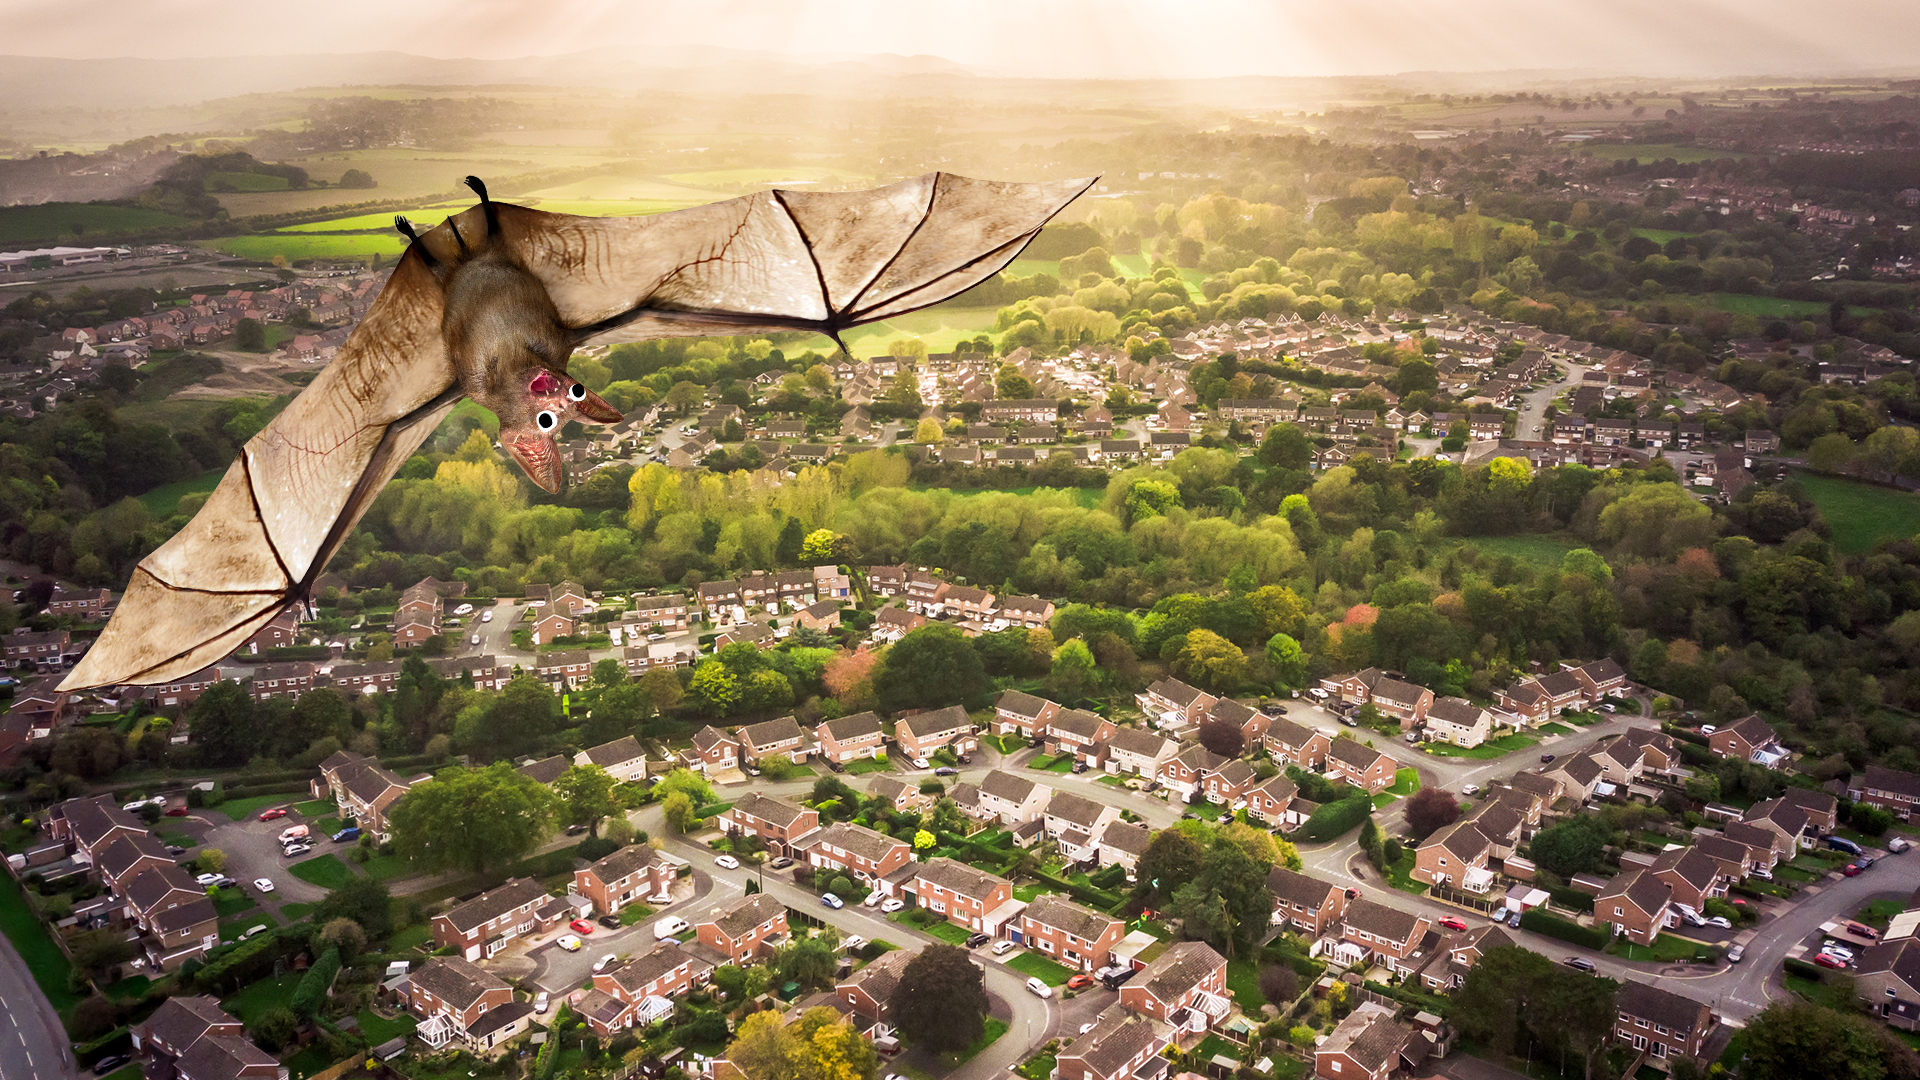 Aerial shot of English town with surprised looking bat